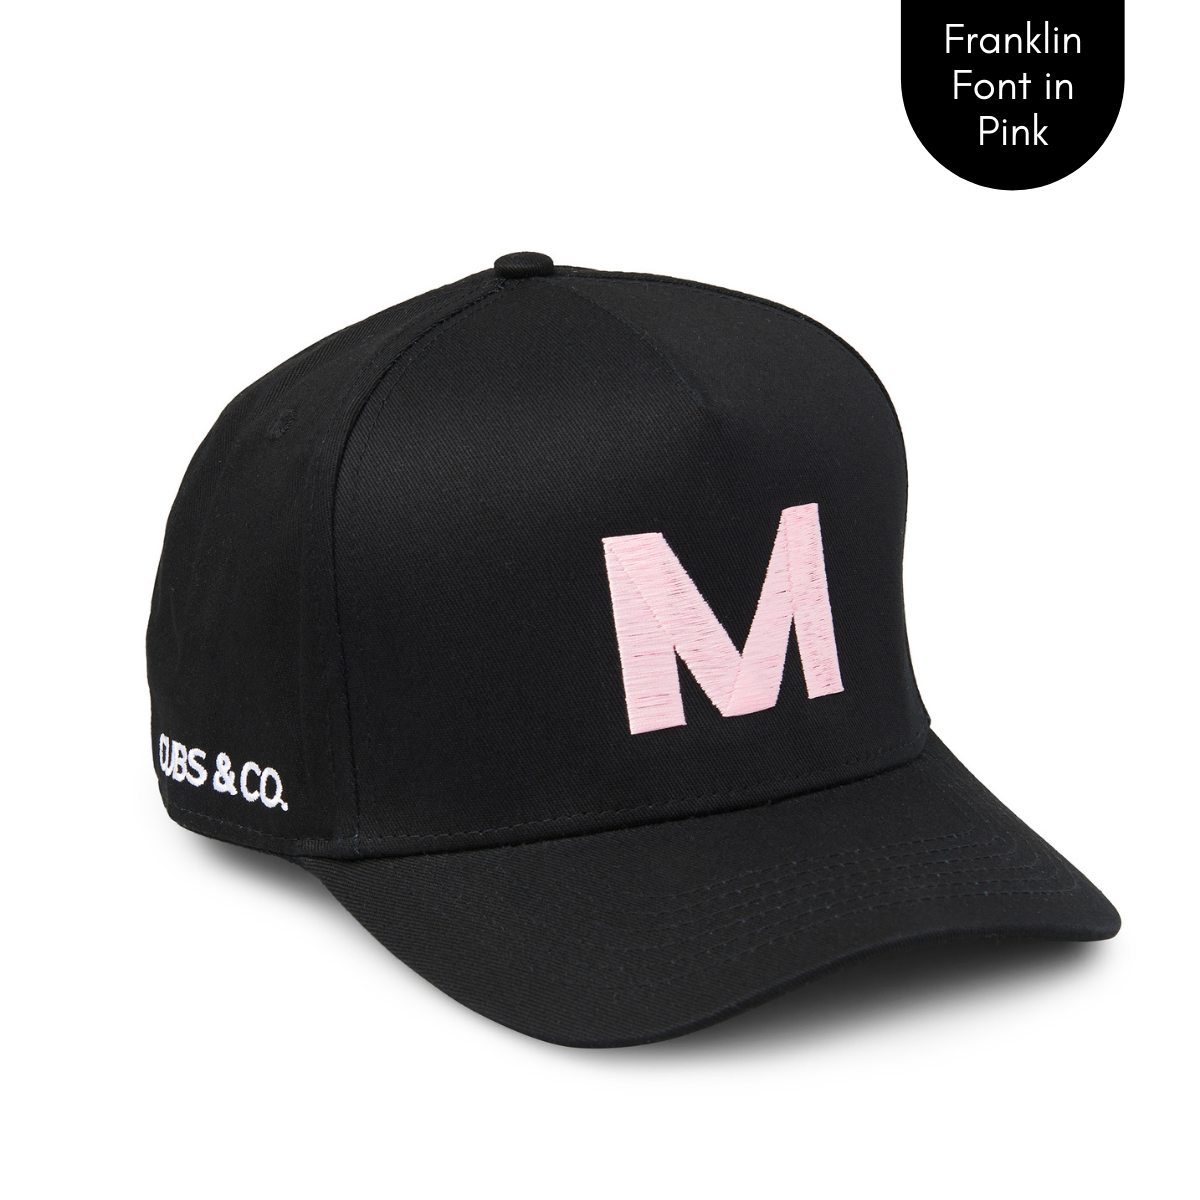 Cubs & Co - PERSONALISED BLACK W/ INITIALS | FRANKLIN PINK PRINT